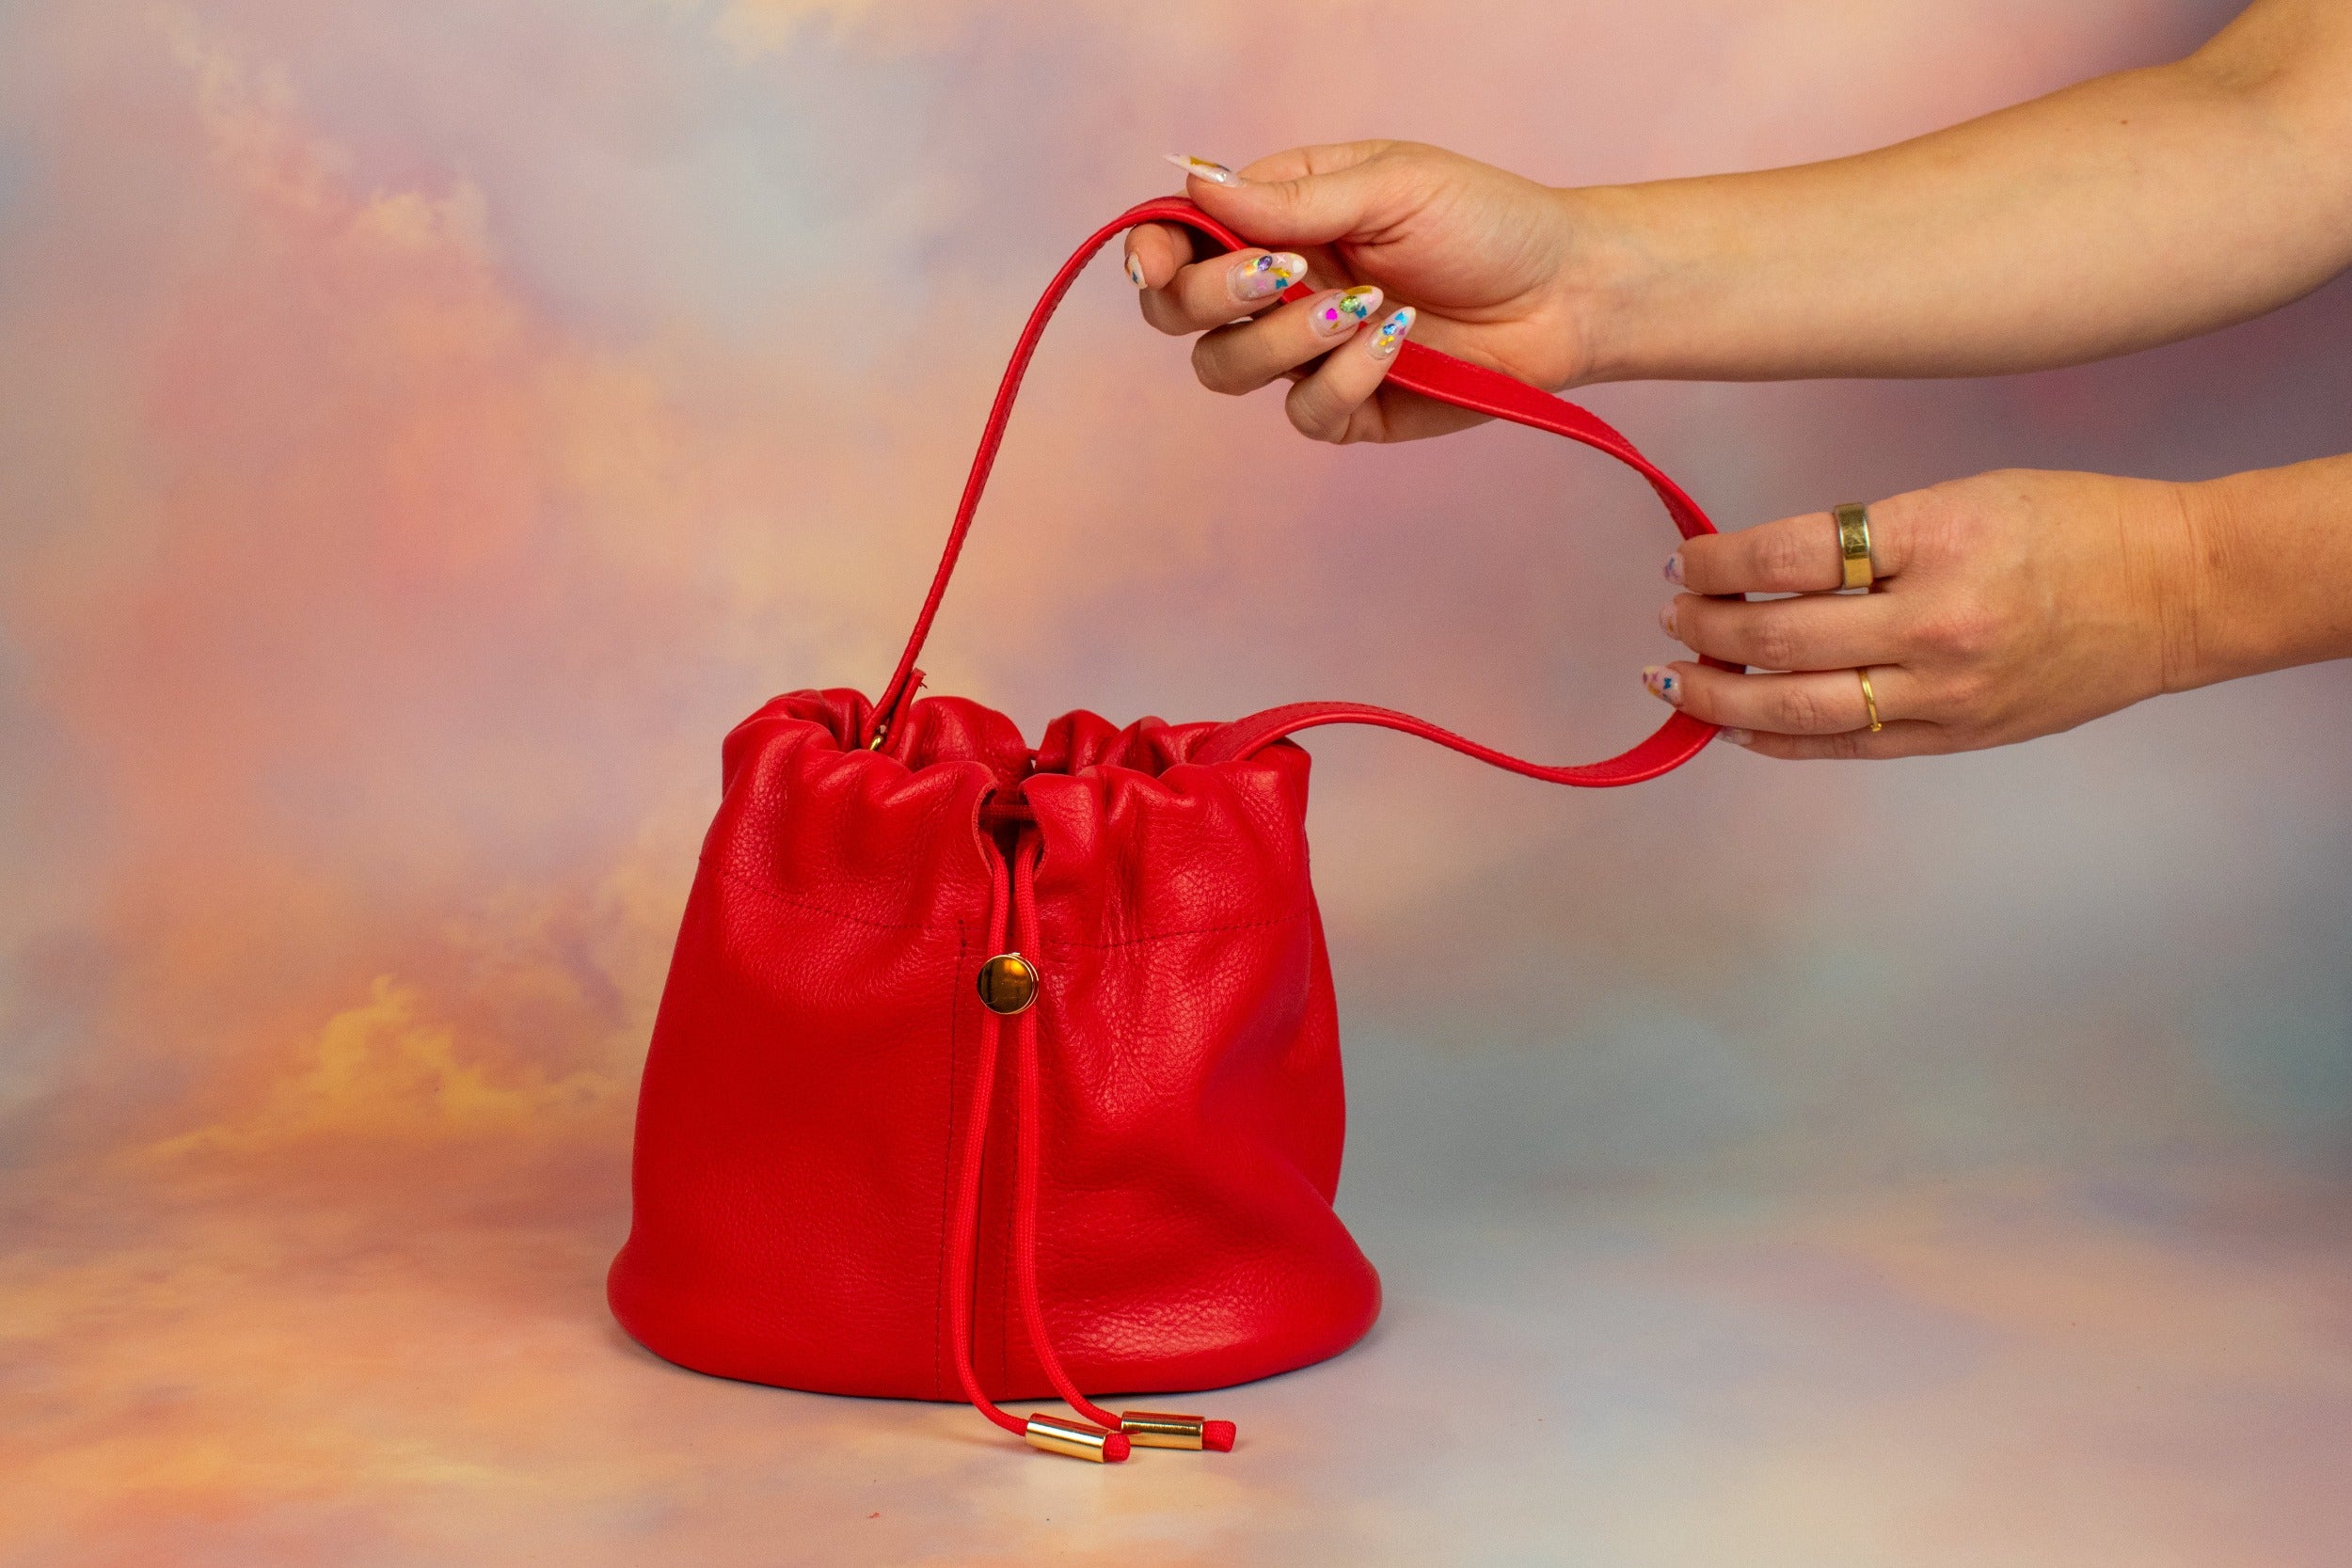 The Duo Bag: A Leather Scrunch Bag in Cherry Red